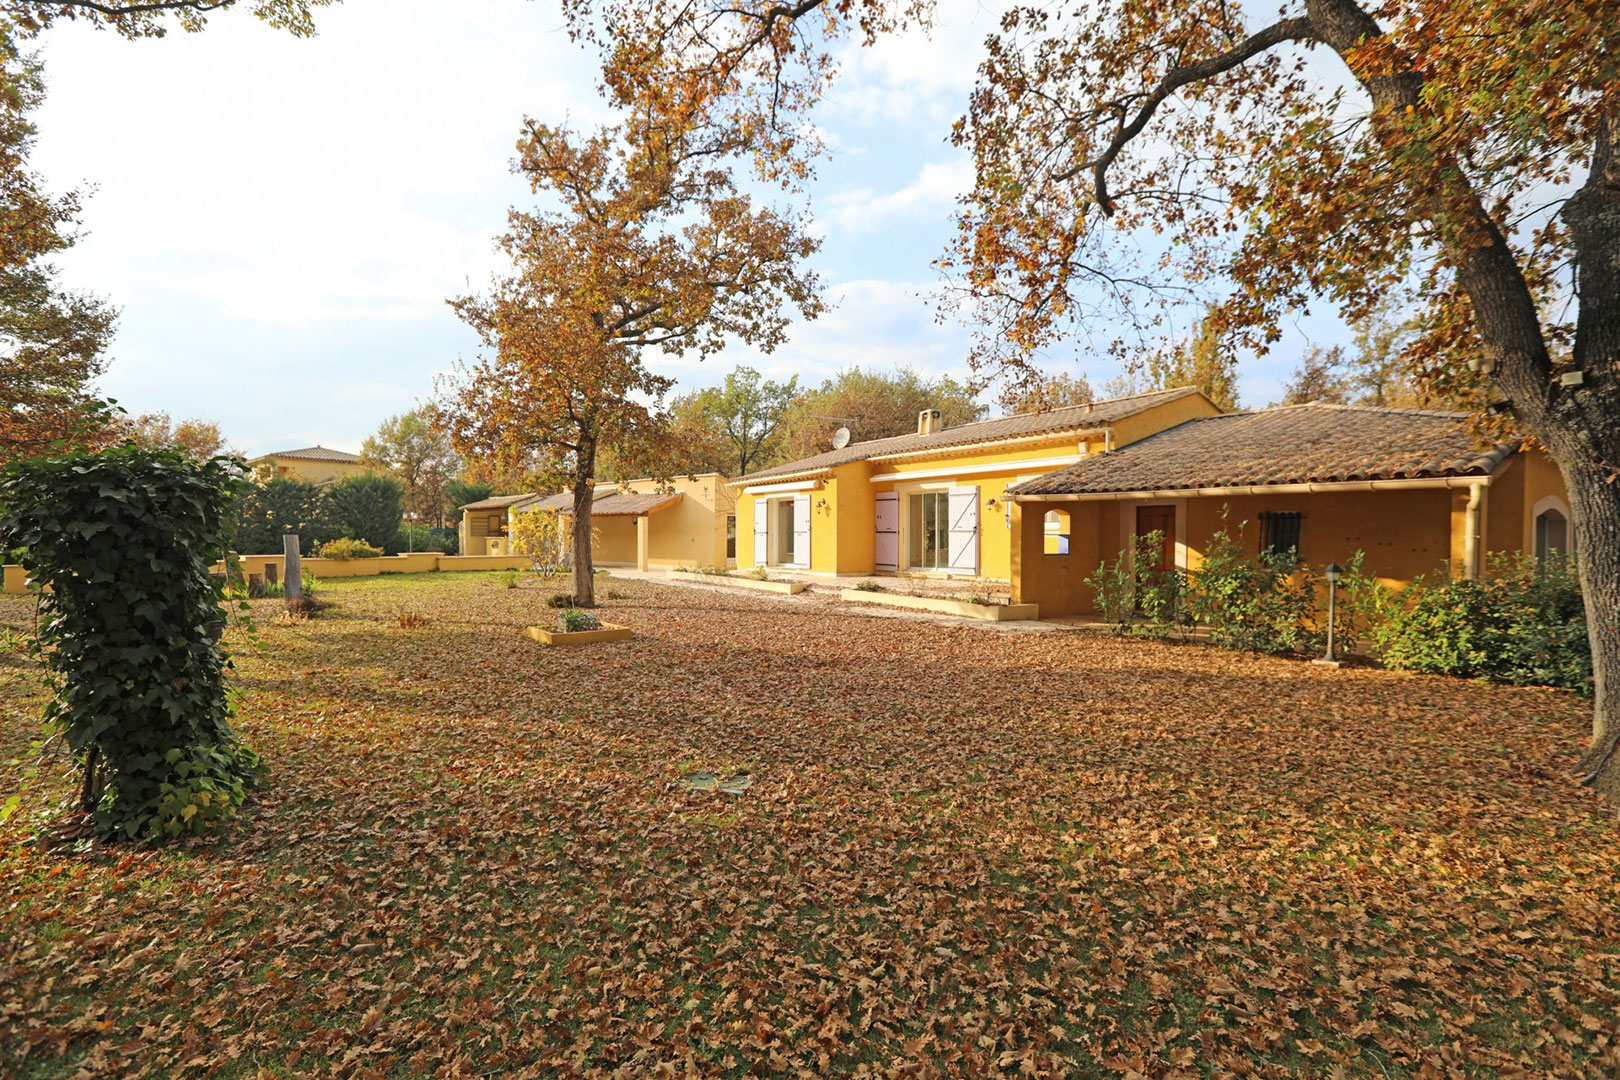 In the Luberon, in the heart of an oak grove, house with outbuildings and swimming pool.